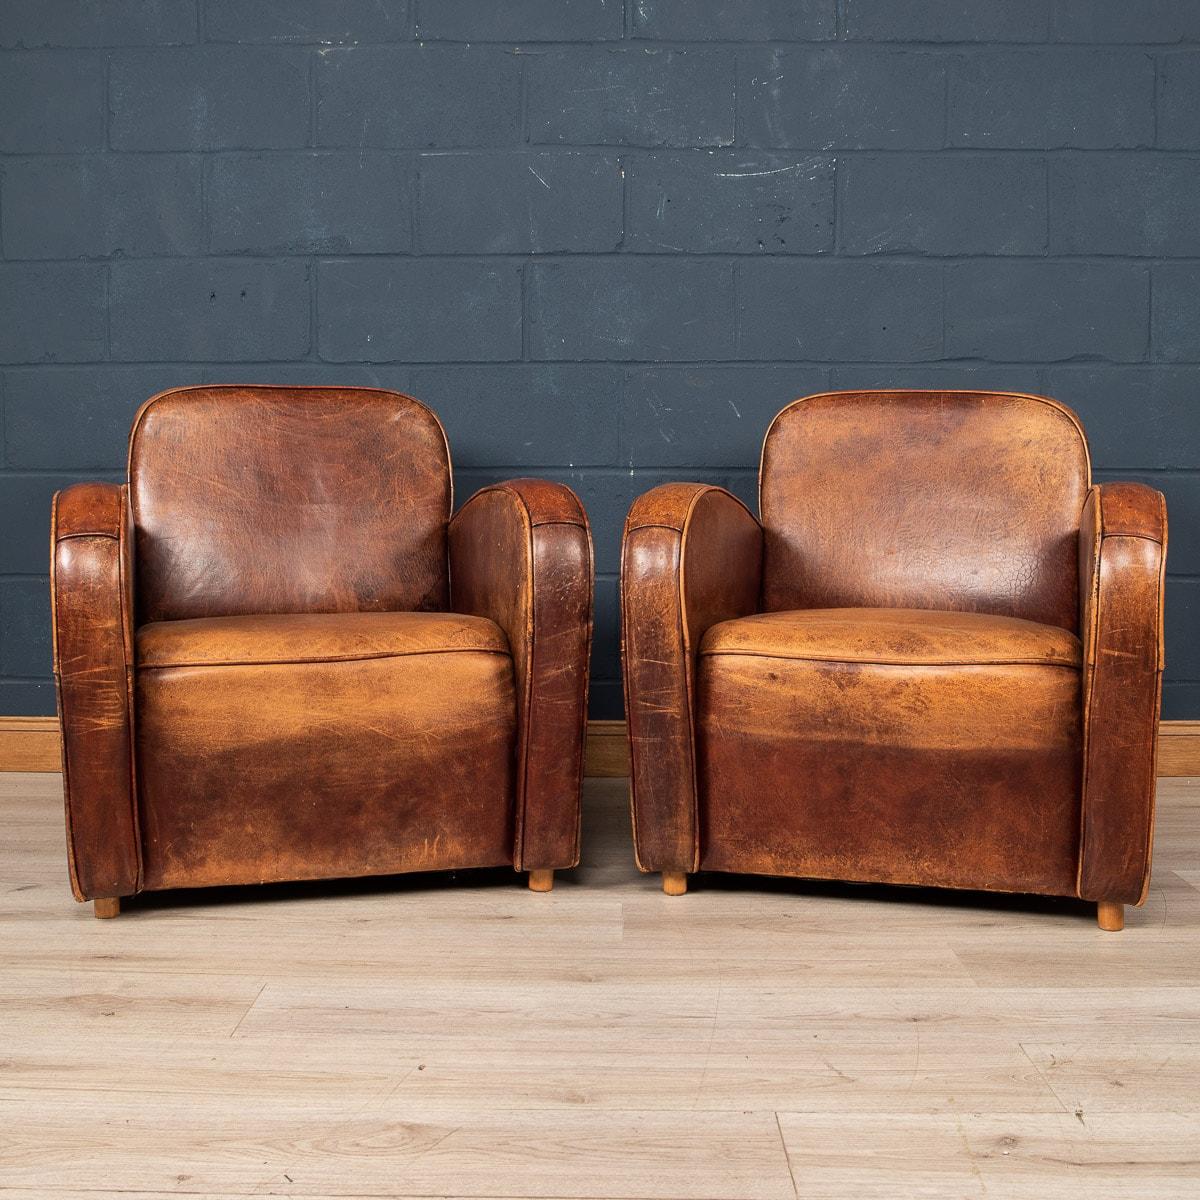 Showing superb patina and colour, this wonderful pair of club chairs were hand upholstered sheepskin leather in Holland by the finest craftsmen in the latter part of the 20th century.
The design and craftsmanship of sheep leather furniture was